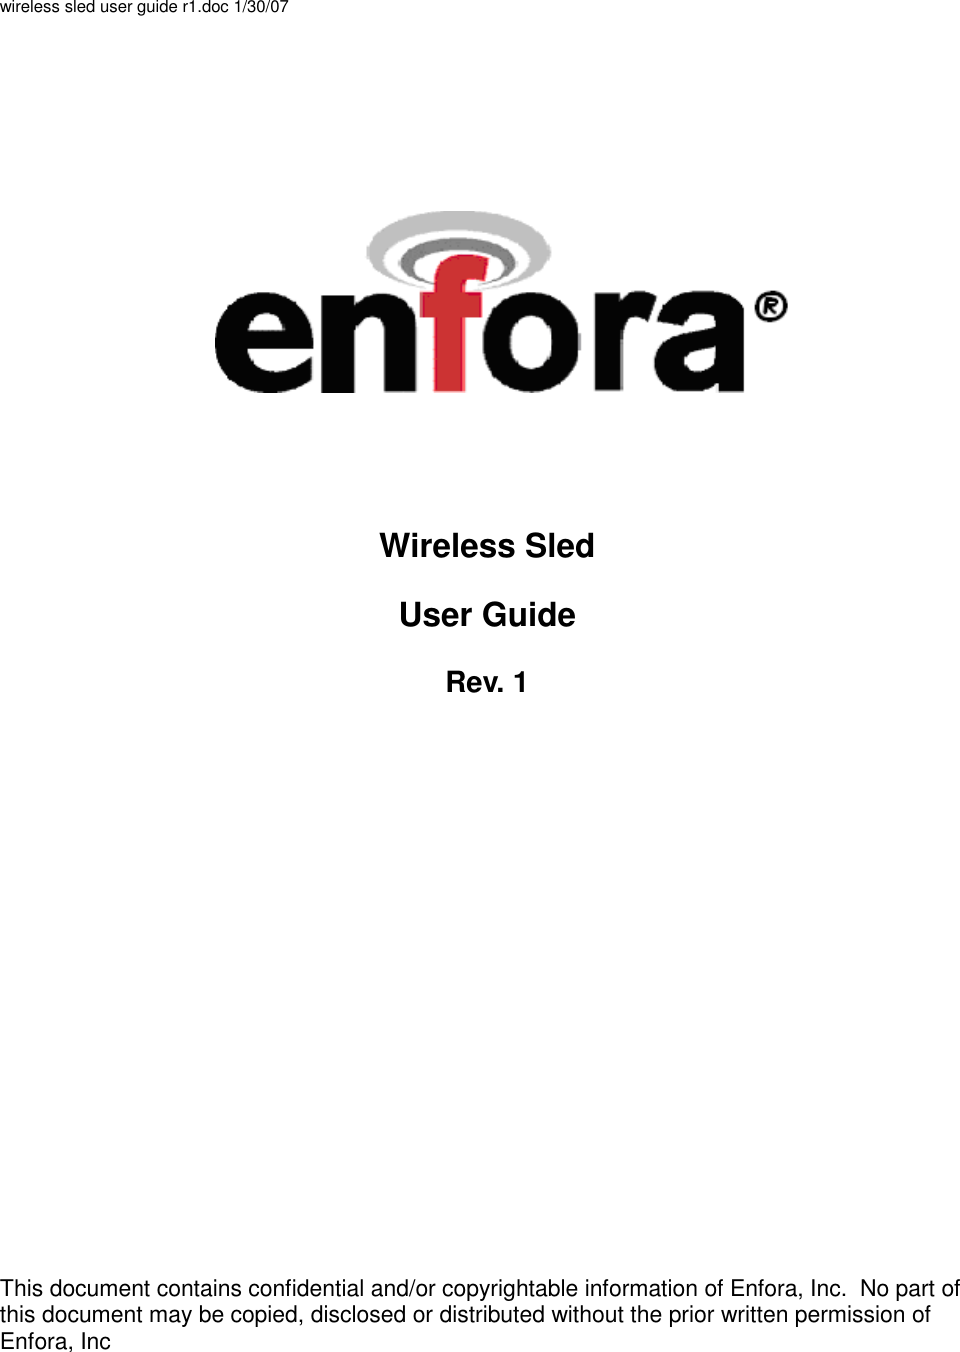 wireless sled user guide r1.doc 1/30/07                    Wireless Sled User Guide  Rev. 1          This document contains confidential and/or copyrightable information of Enfora, Inc.  No part of this document may be copied, disclosed or distributed without the prior written permission of Enfora, Inc 